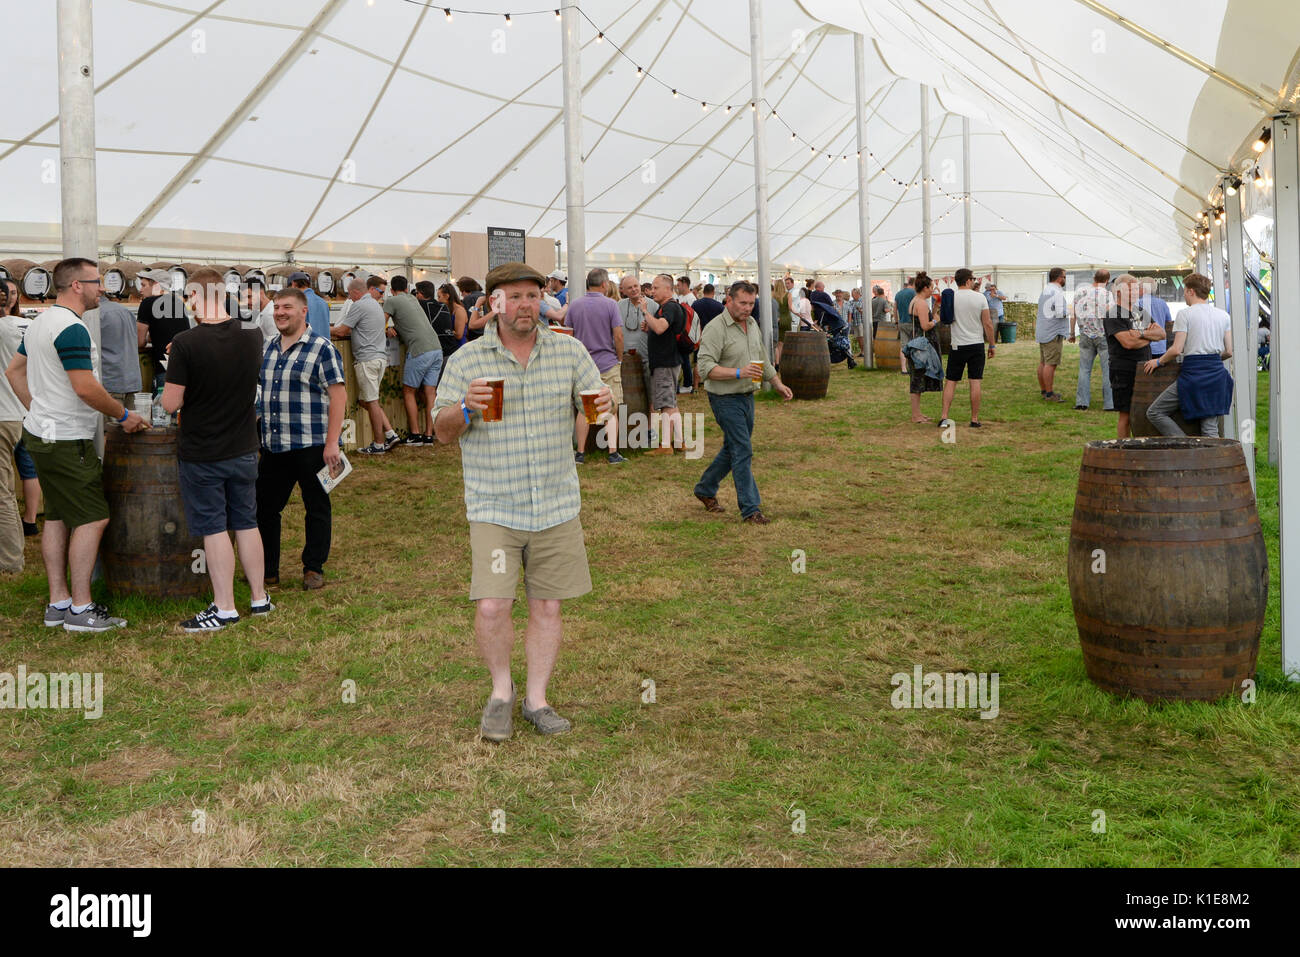 Man carrying pints of beer at a beer festival Stock Photo